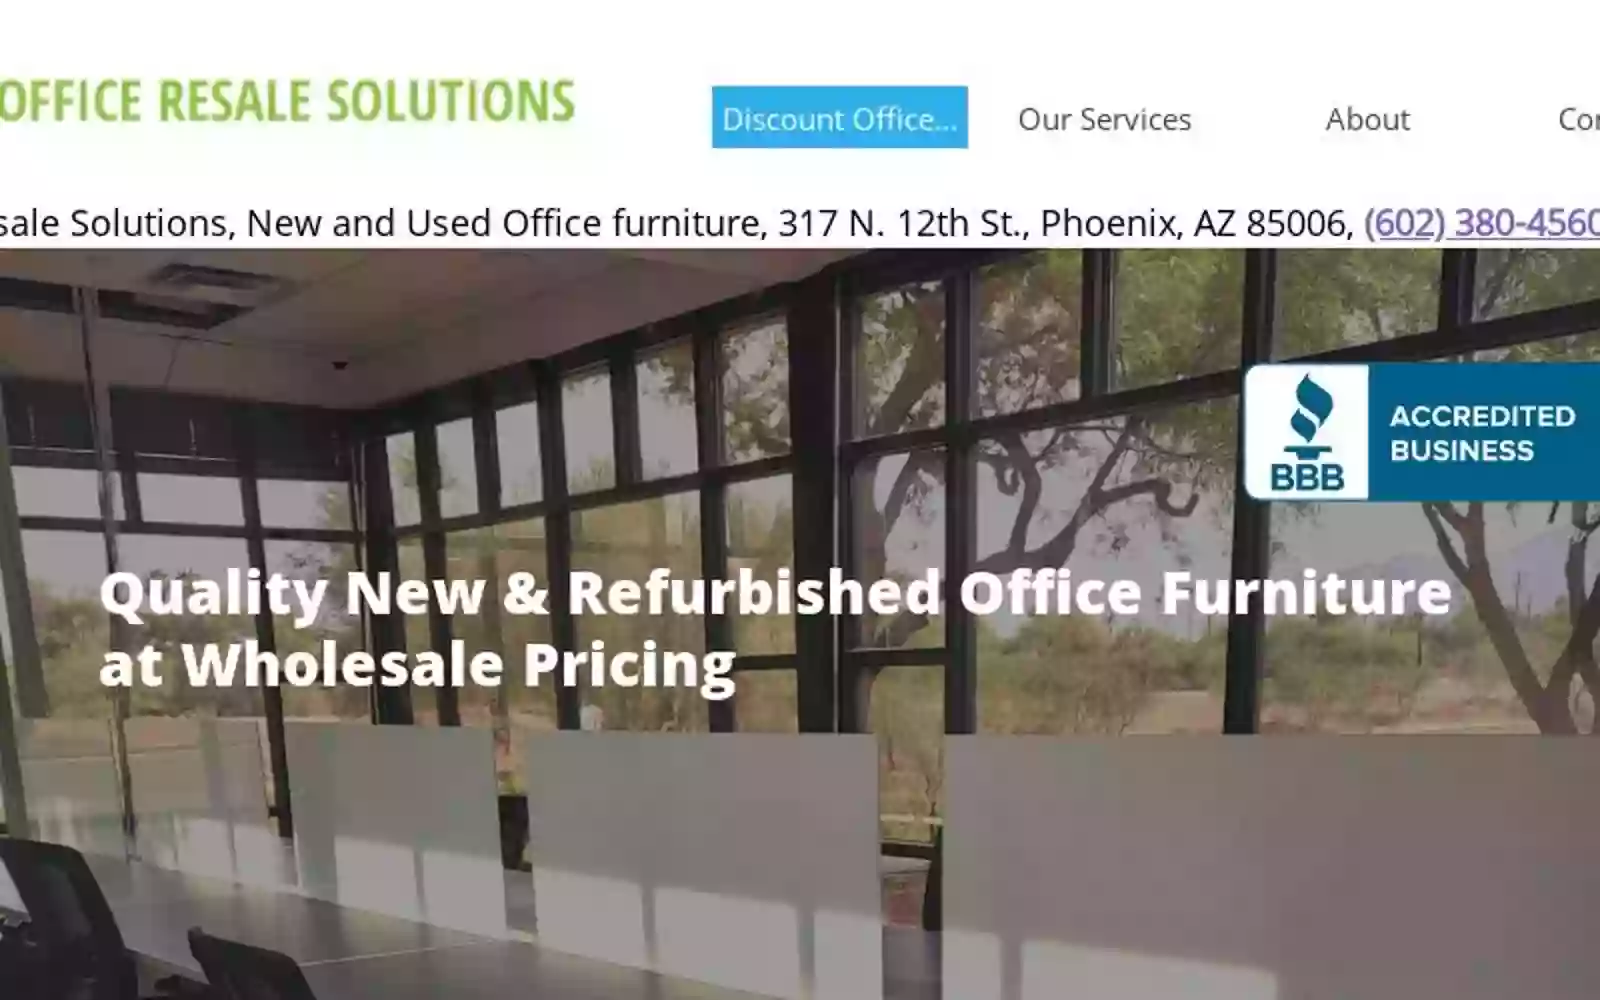 Office Resale Solutions